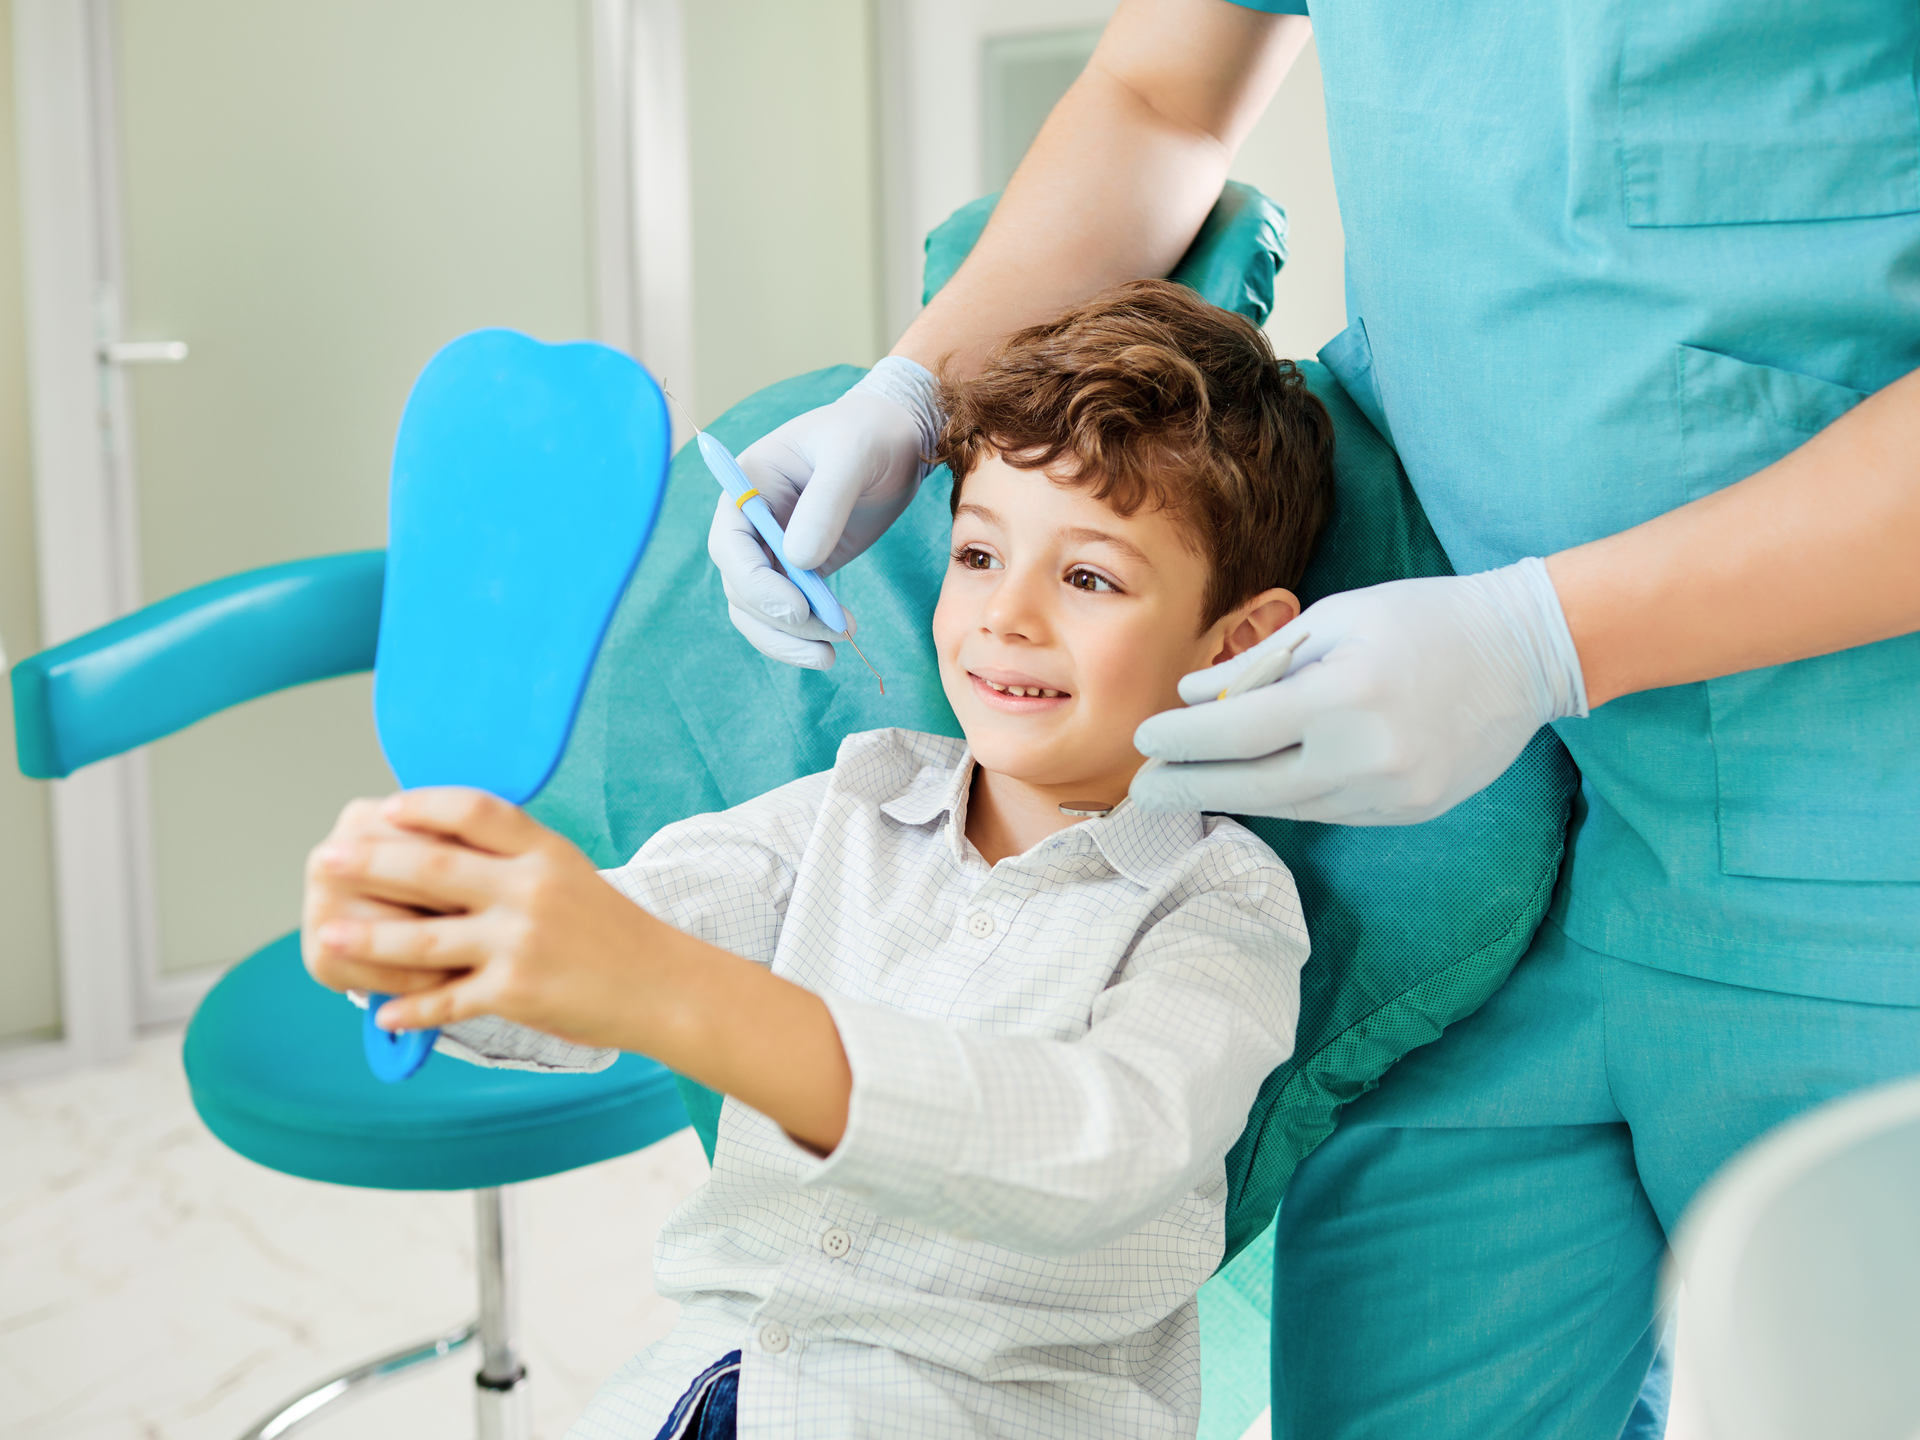 a young boy is sitting in a dental chair looking at his teeth in a mirror .